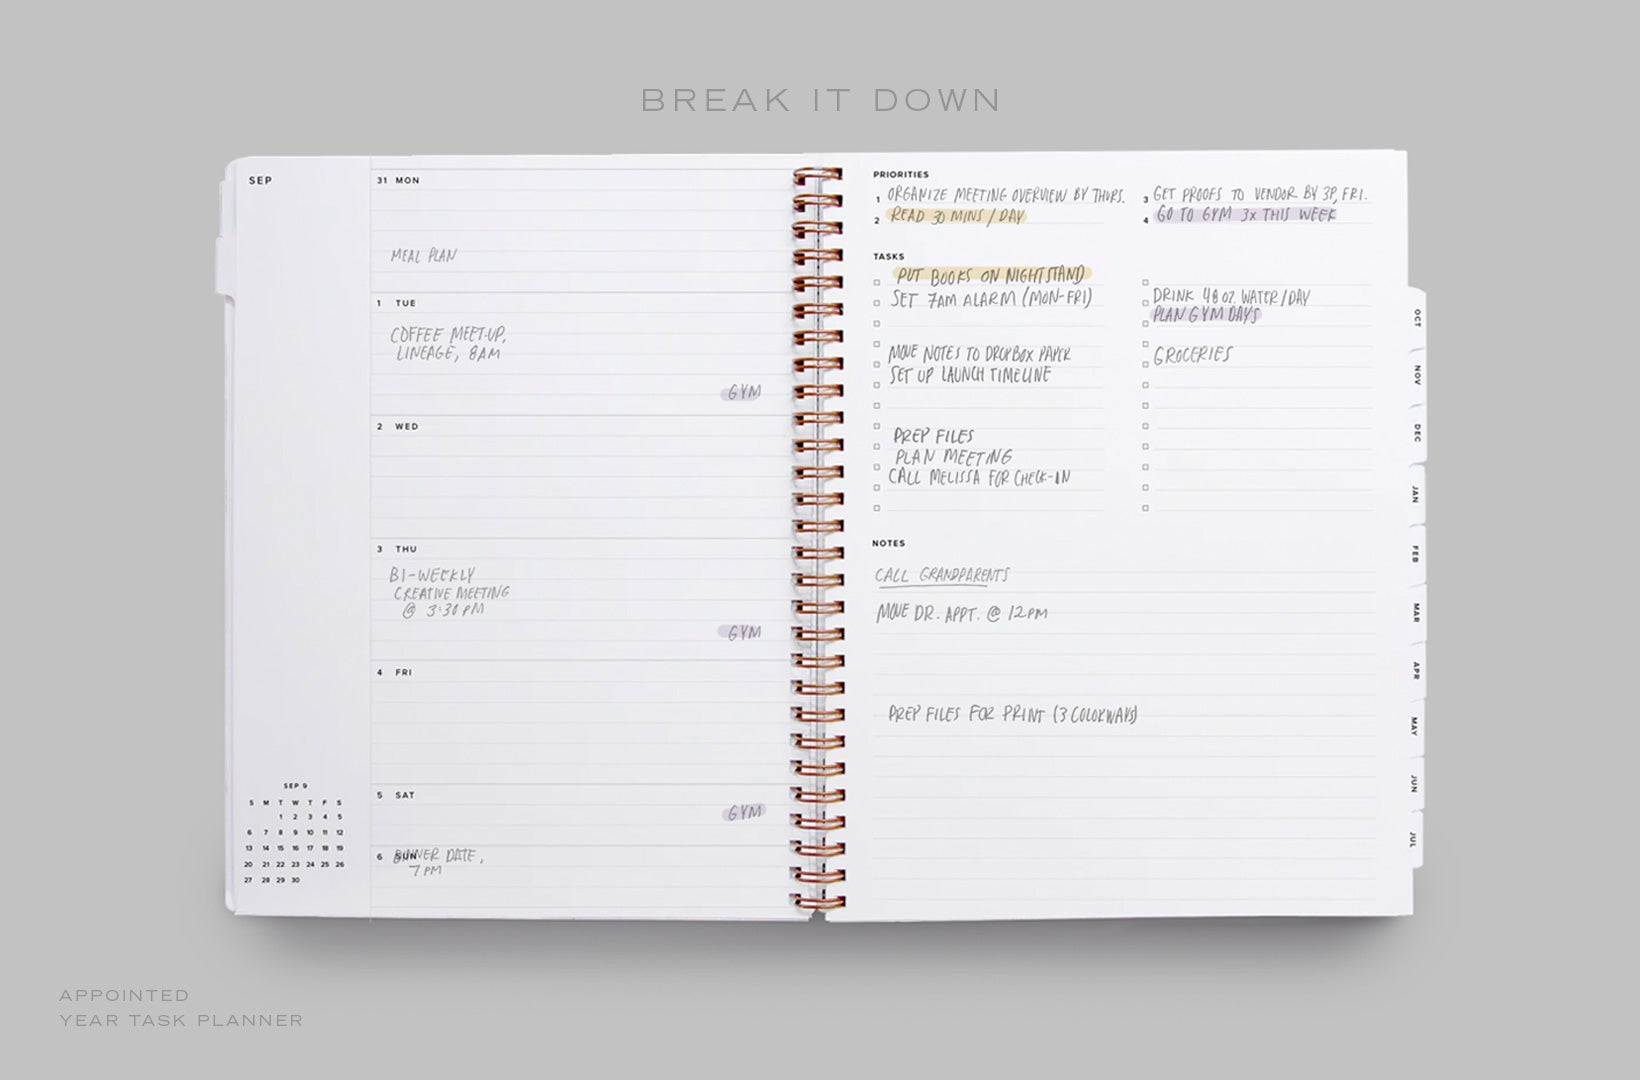 A Year Task Planner lies open to the weekly spread, with priorities, tasks, and schedule filled in